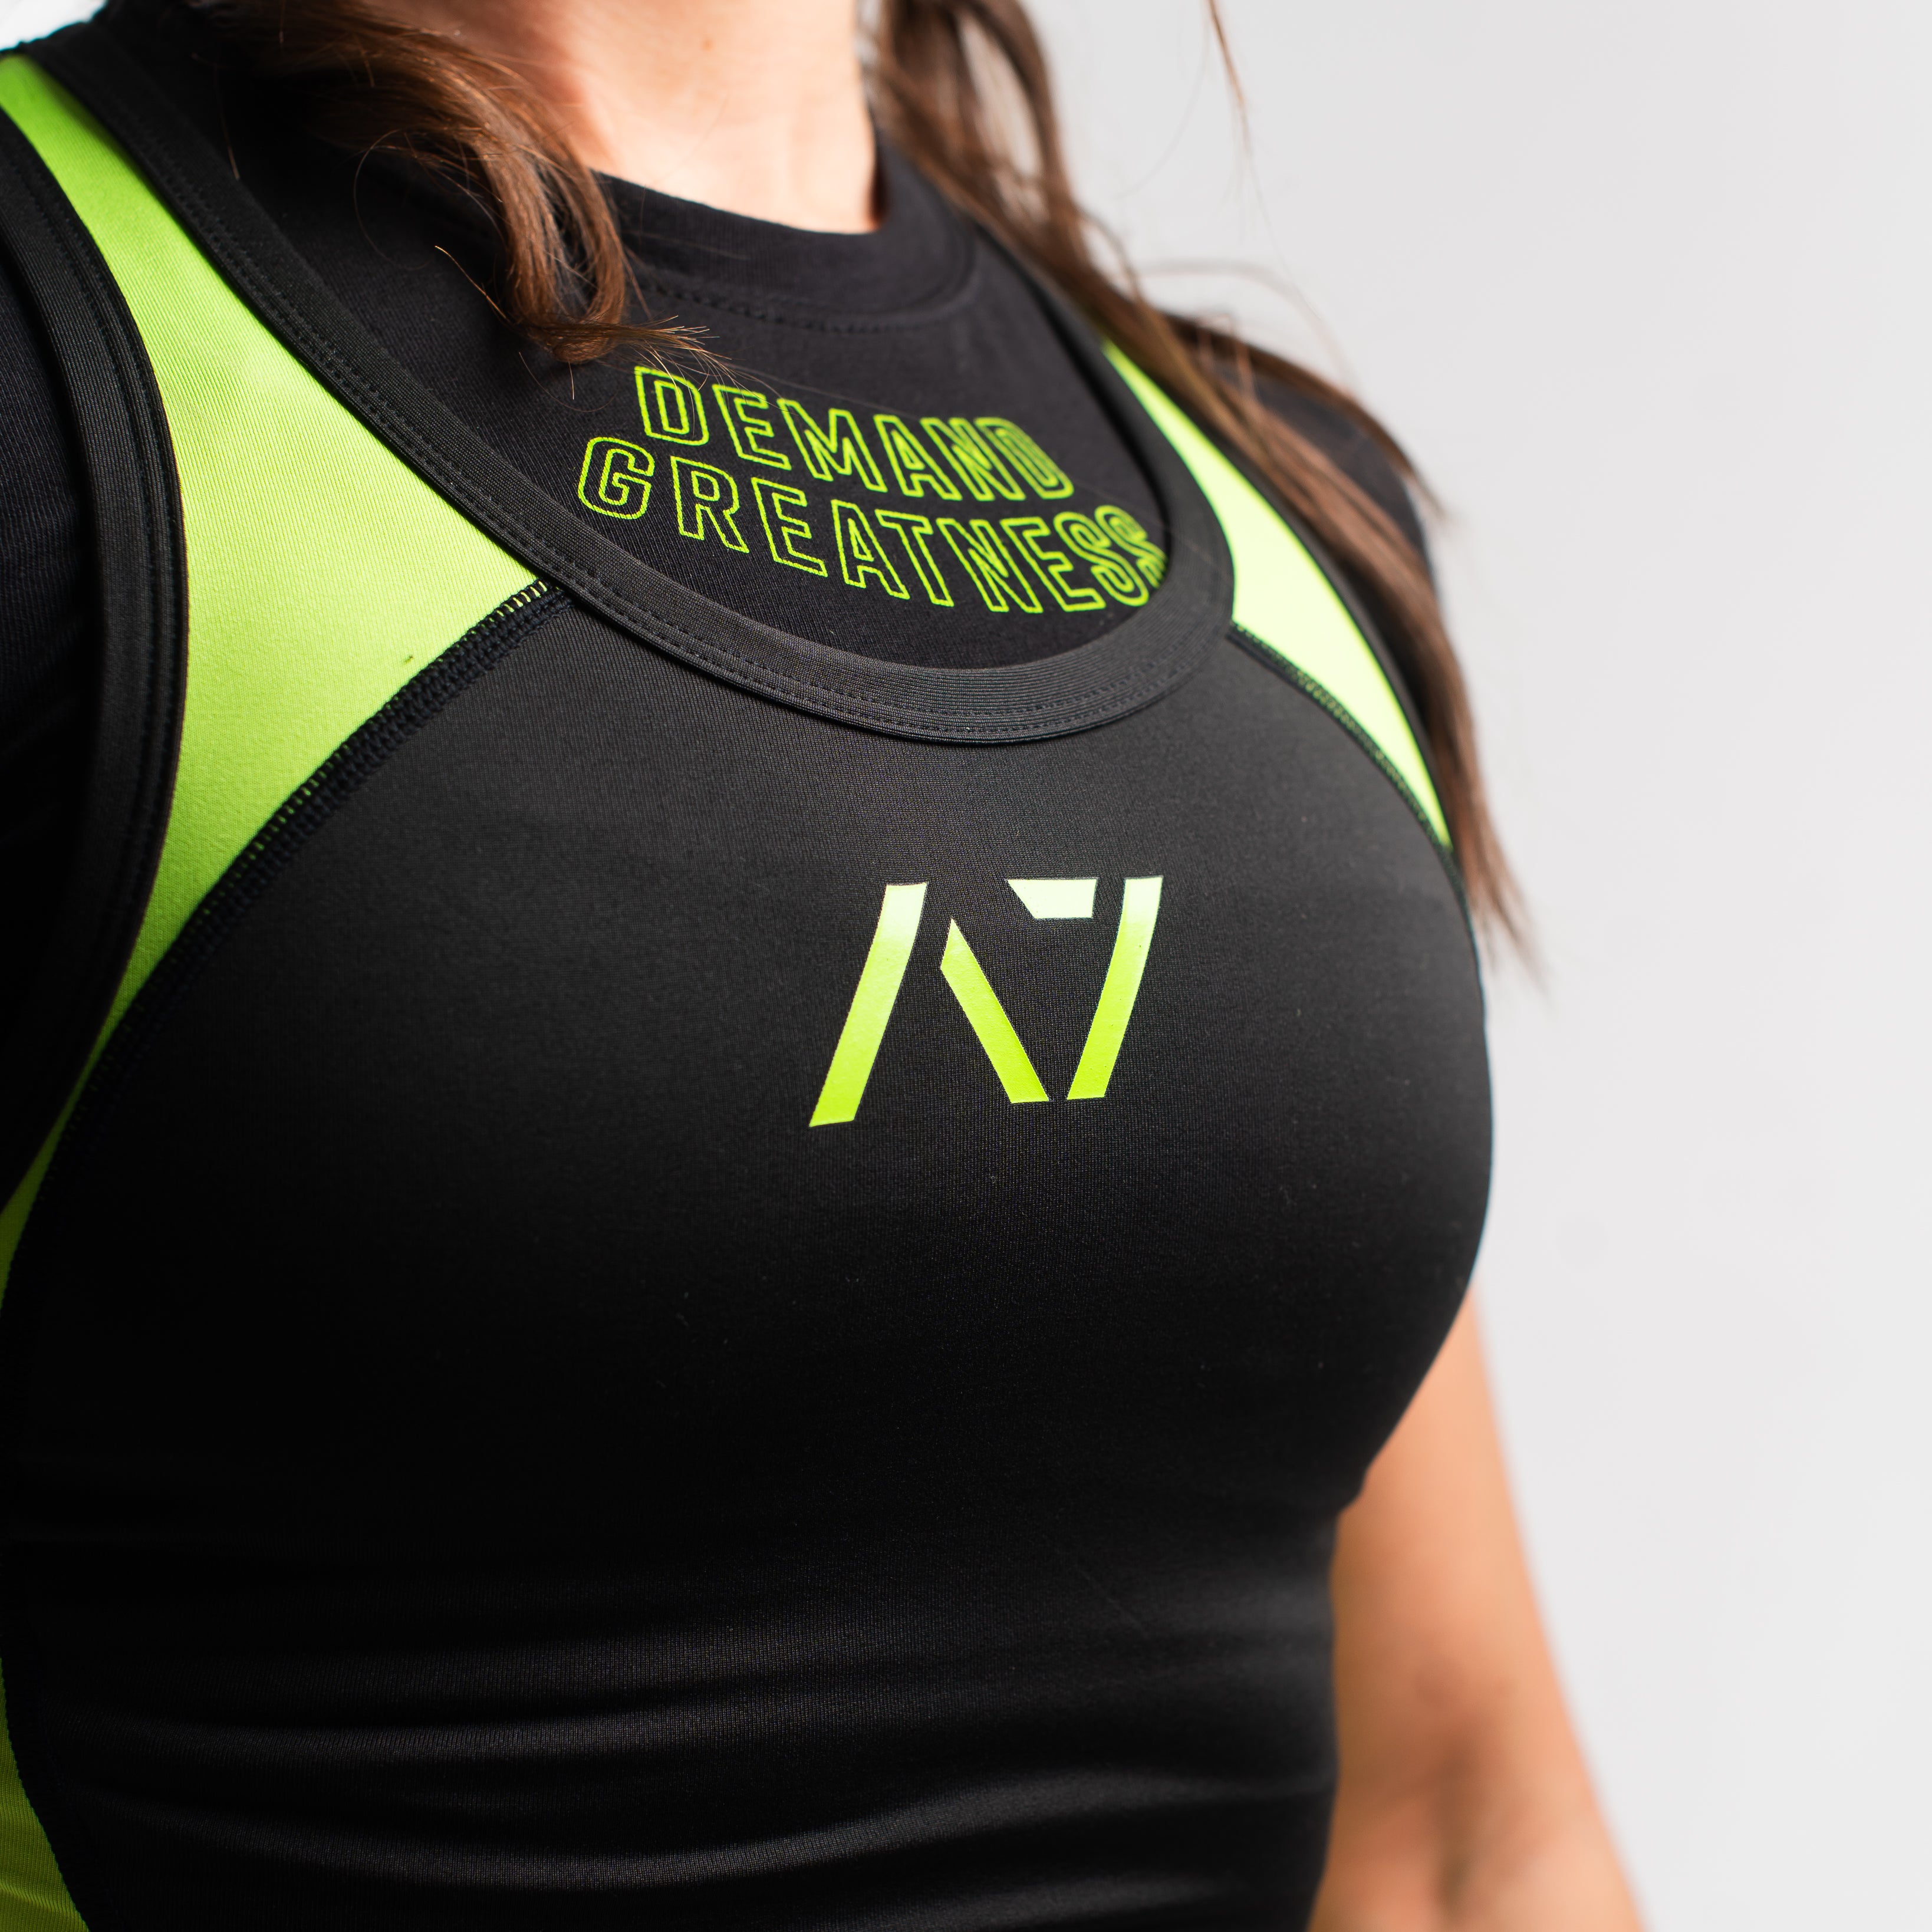 A7 IPF Approved Alien Luno singlet features extra lat mobility, side panel stitching to guide the squat depth level and curved panel design for a slimming look. The Women's cut singlet features a tapered waist and additional quad room. The IPF Approved Kit includes Powerlifting Singlet, A7 Meet Shirt, Deadlift Socks, Hourglass Knee Sleeves (Stiff Knee Sleeves and Rigor Mortis Knee Sleeves). Genouillères powerlifting shipping to France, Spain, Ireland, Germany, Italy, Sweden and EU.